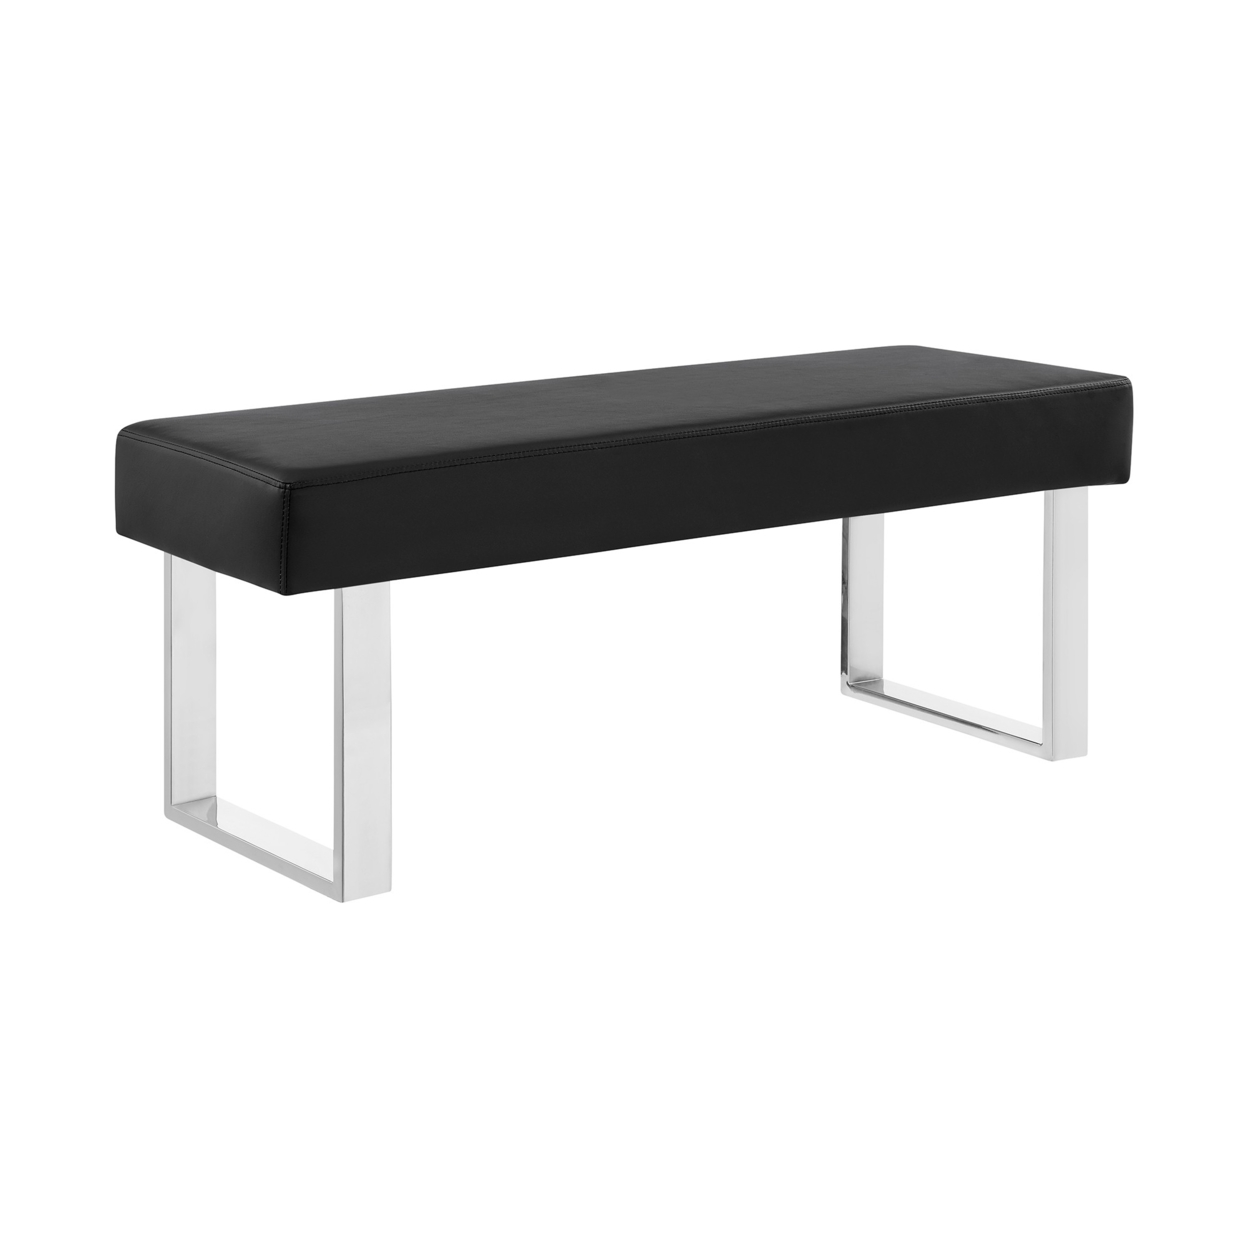 48 Inch Bench With Leatherette Padded Seat And Metal Frame, Black- Saltoro Sherpi